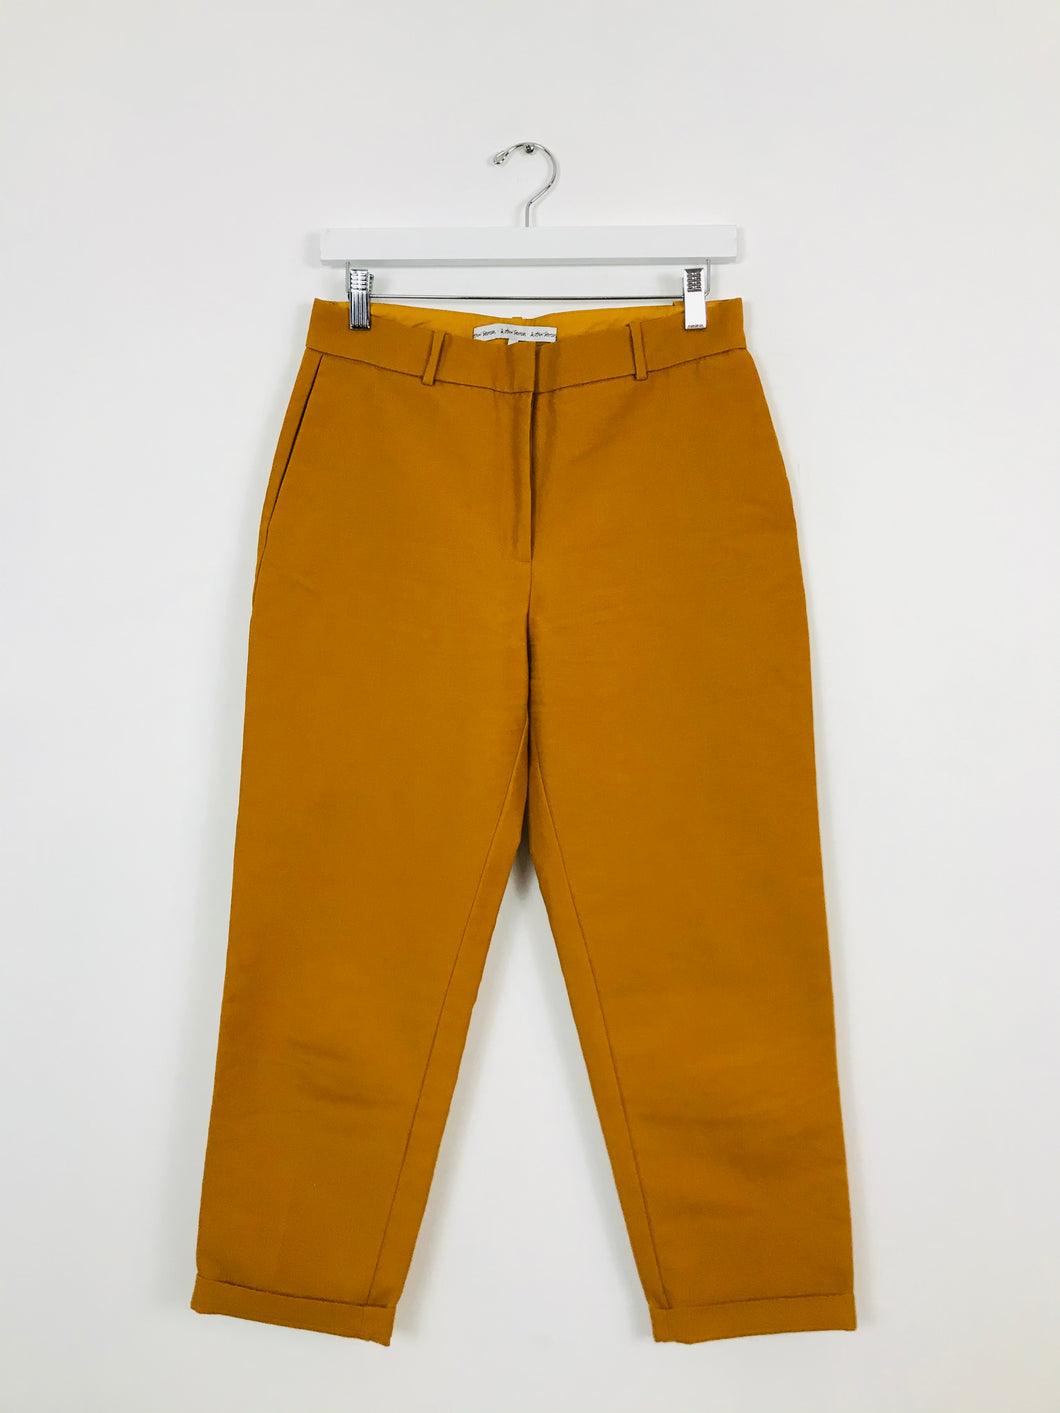 & Other Stories Womens Tapered Trousers | 36 UK10 | Yellow